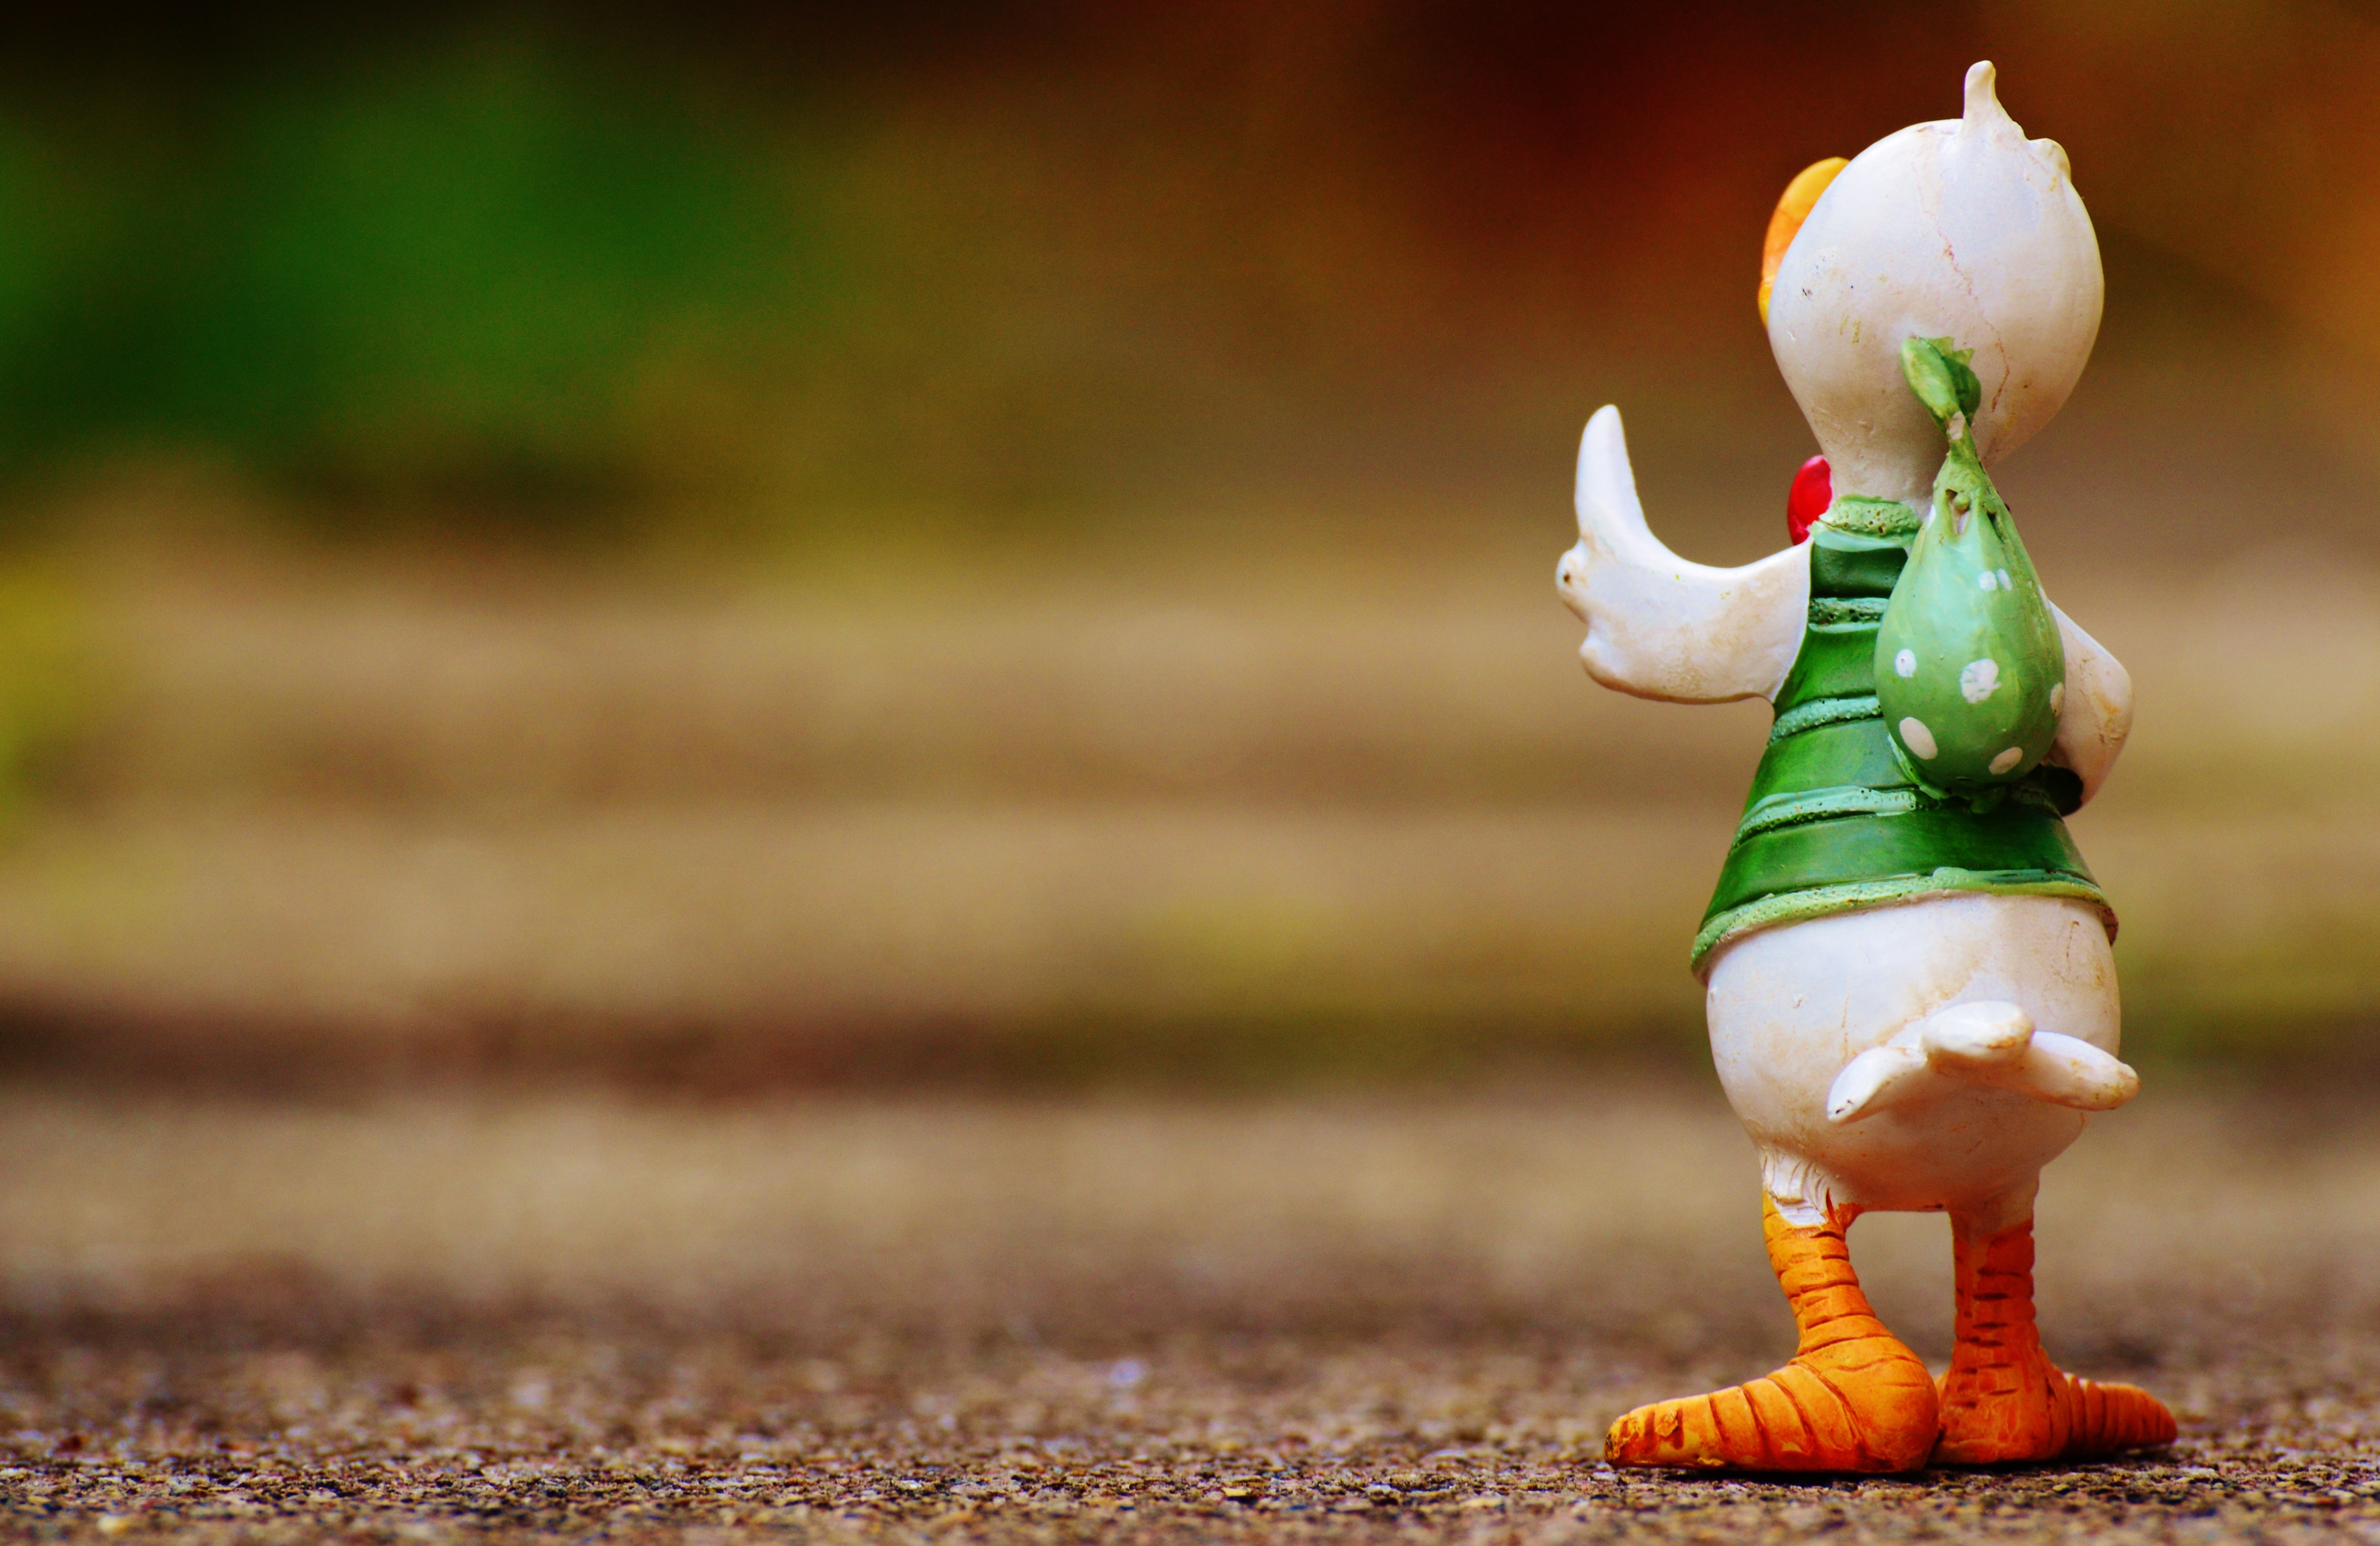 person taking photo of white, green, and orange bird figurine in tilt shift photography